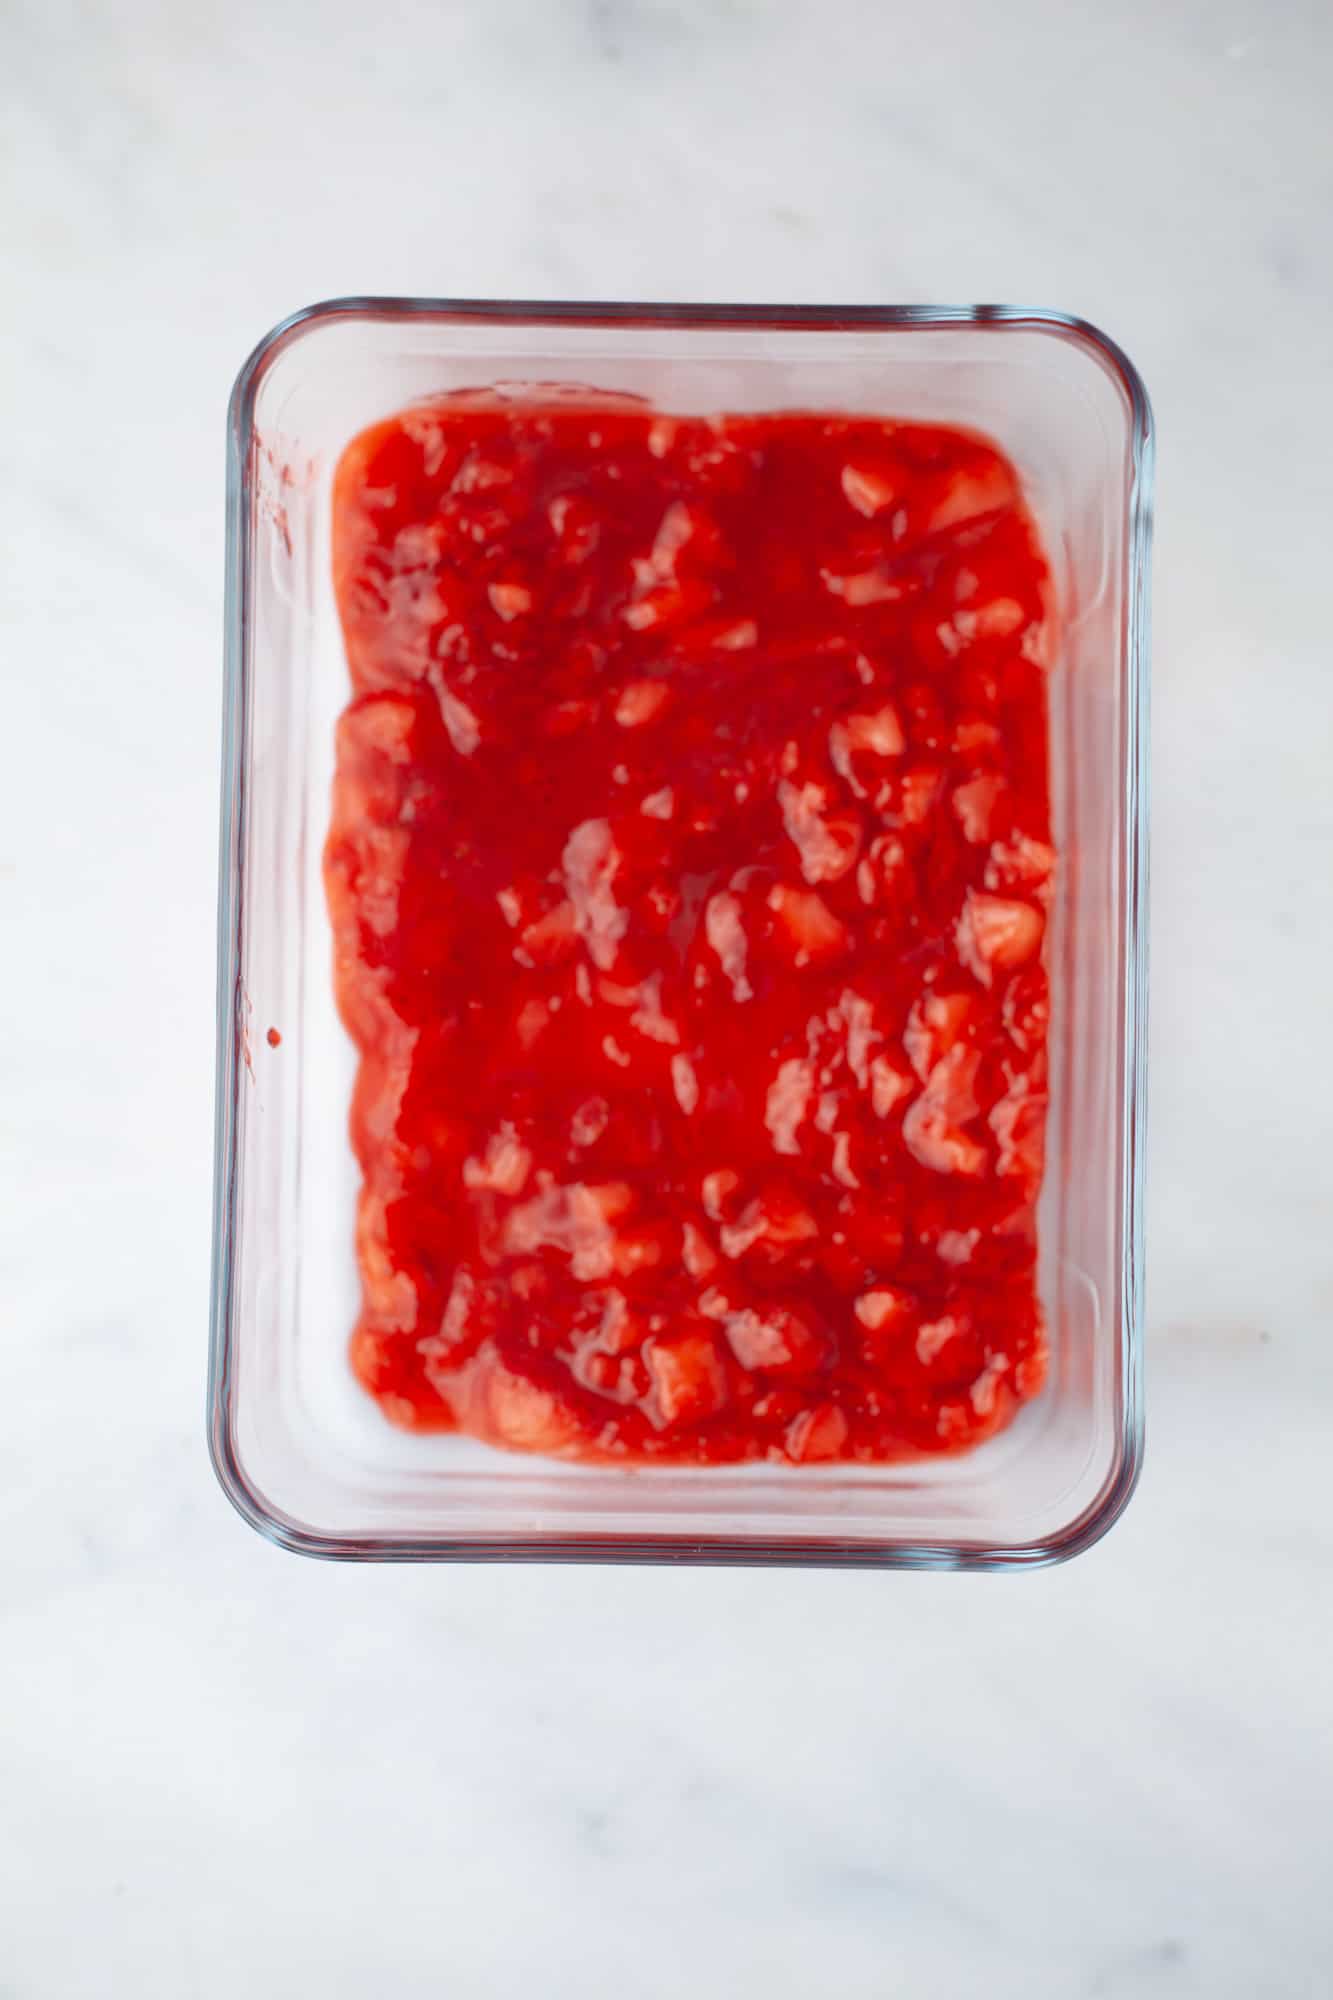 A pyrex rectangular glass dish with strawberry preserves in it